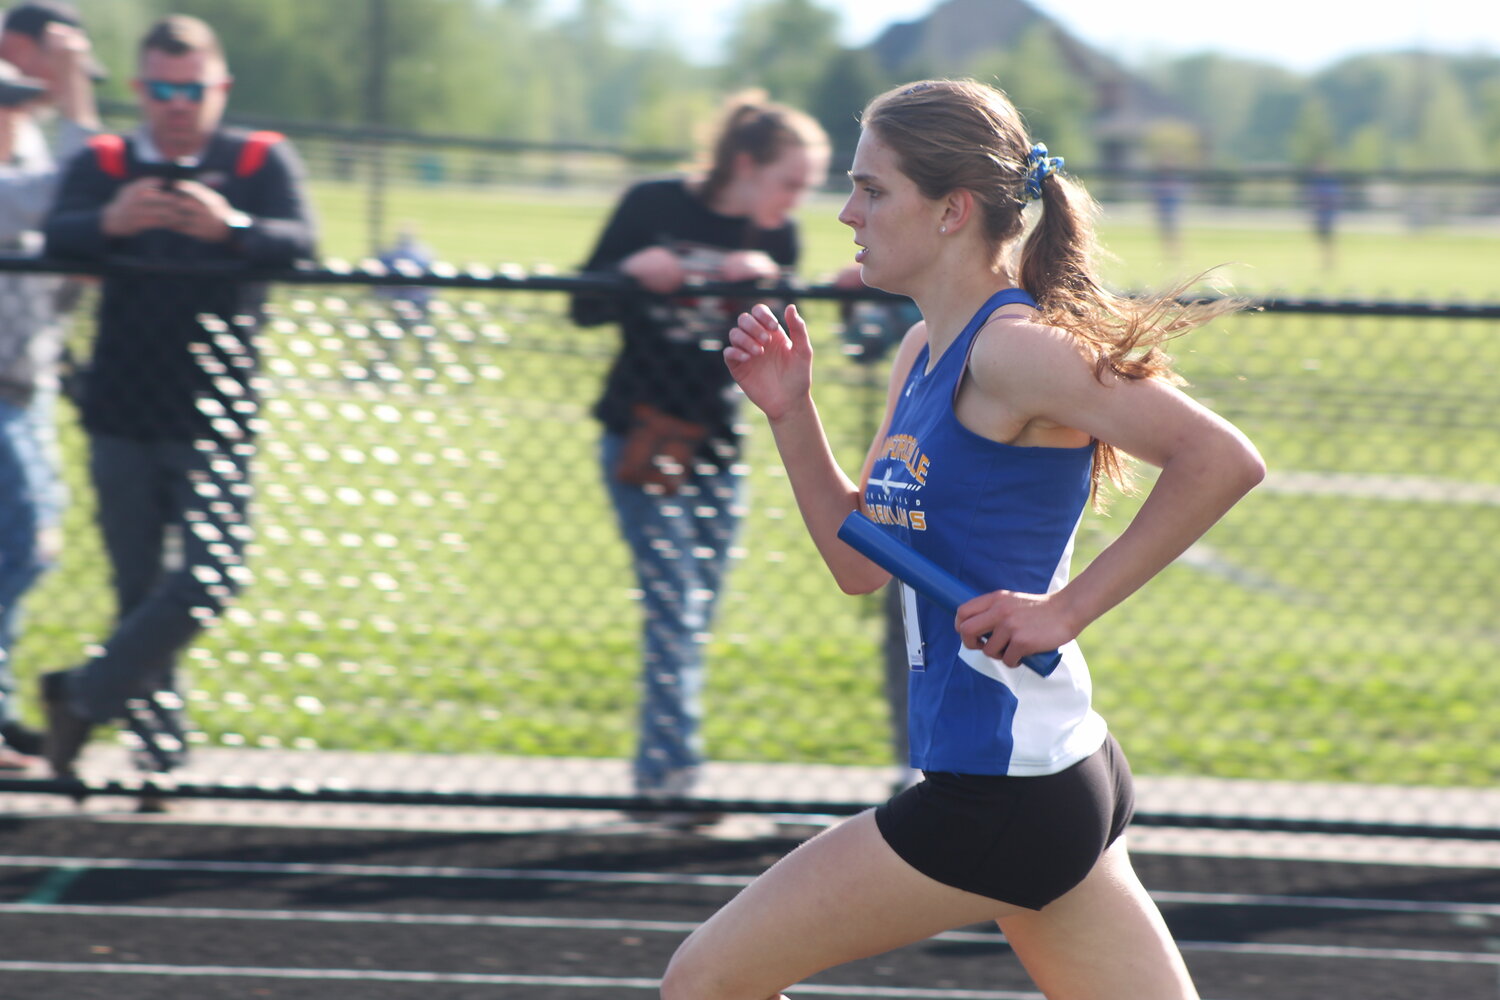 Katehrine Novak was also a member of the CHS 4x800 team that broke the school record.